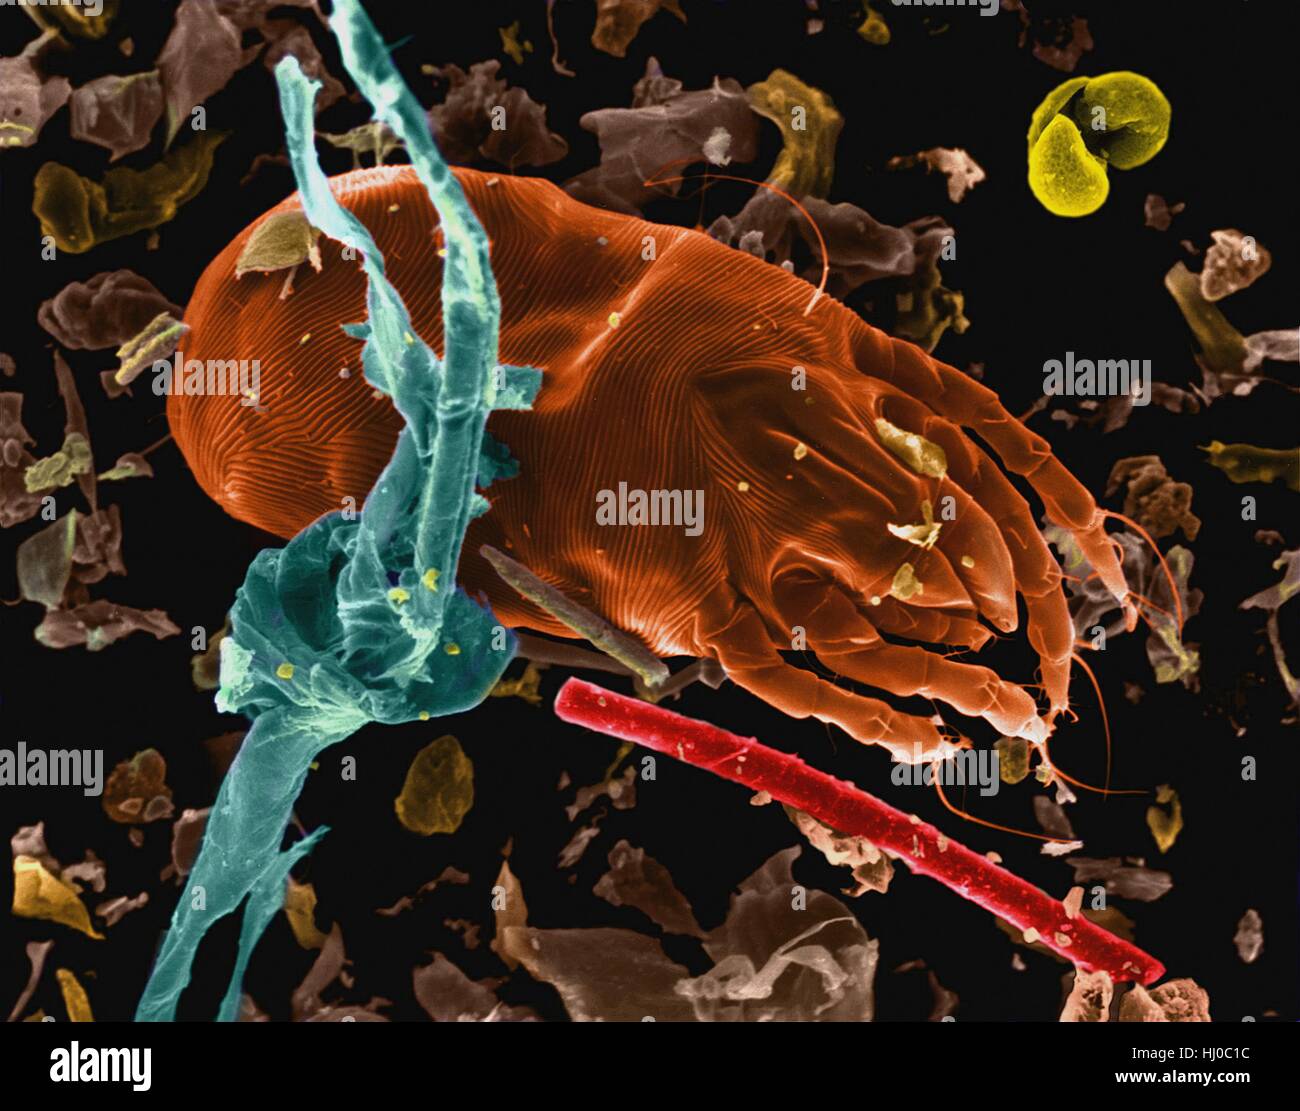 Coloured scanning electron micrograph (SEM) of Dust mite (Dermatophagoides pteronyssinus).Millions of dust mites inhabit home,feeding on dead human skin that are common in house dust.The mite's body is in three parts: gnathosoma (head region) adapted for feeding on dead skin,the propodosma Stock Photo